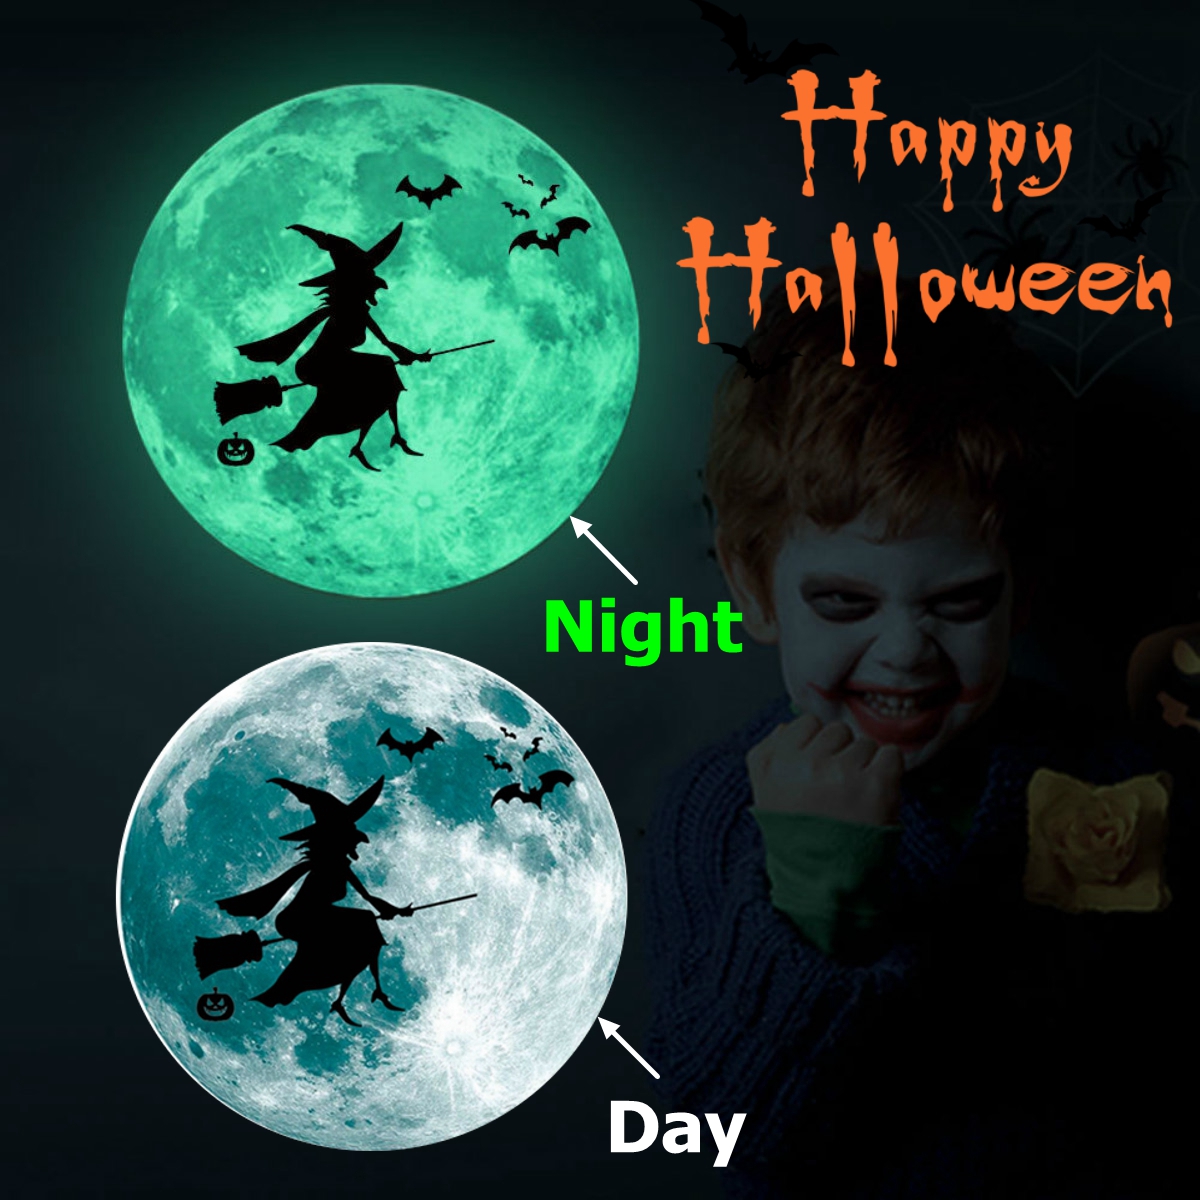 Halloween-Moon-Bat-Glow-In-Dark-Wall-Sticker-Luminous-Removable-Party-Room-Decorations-1585181-1